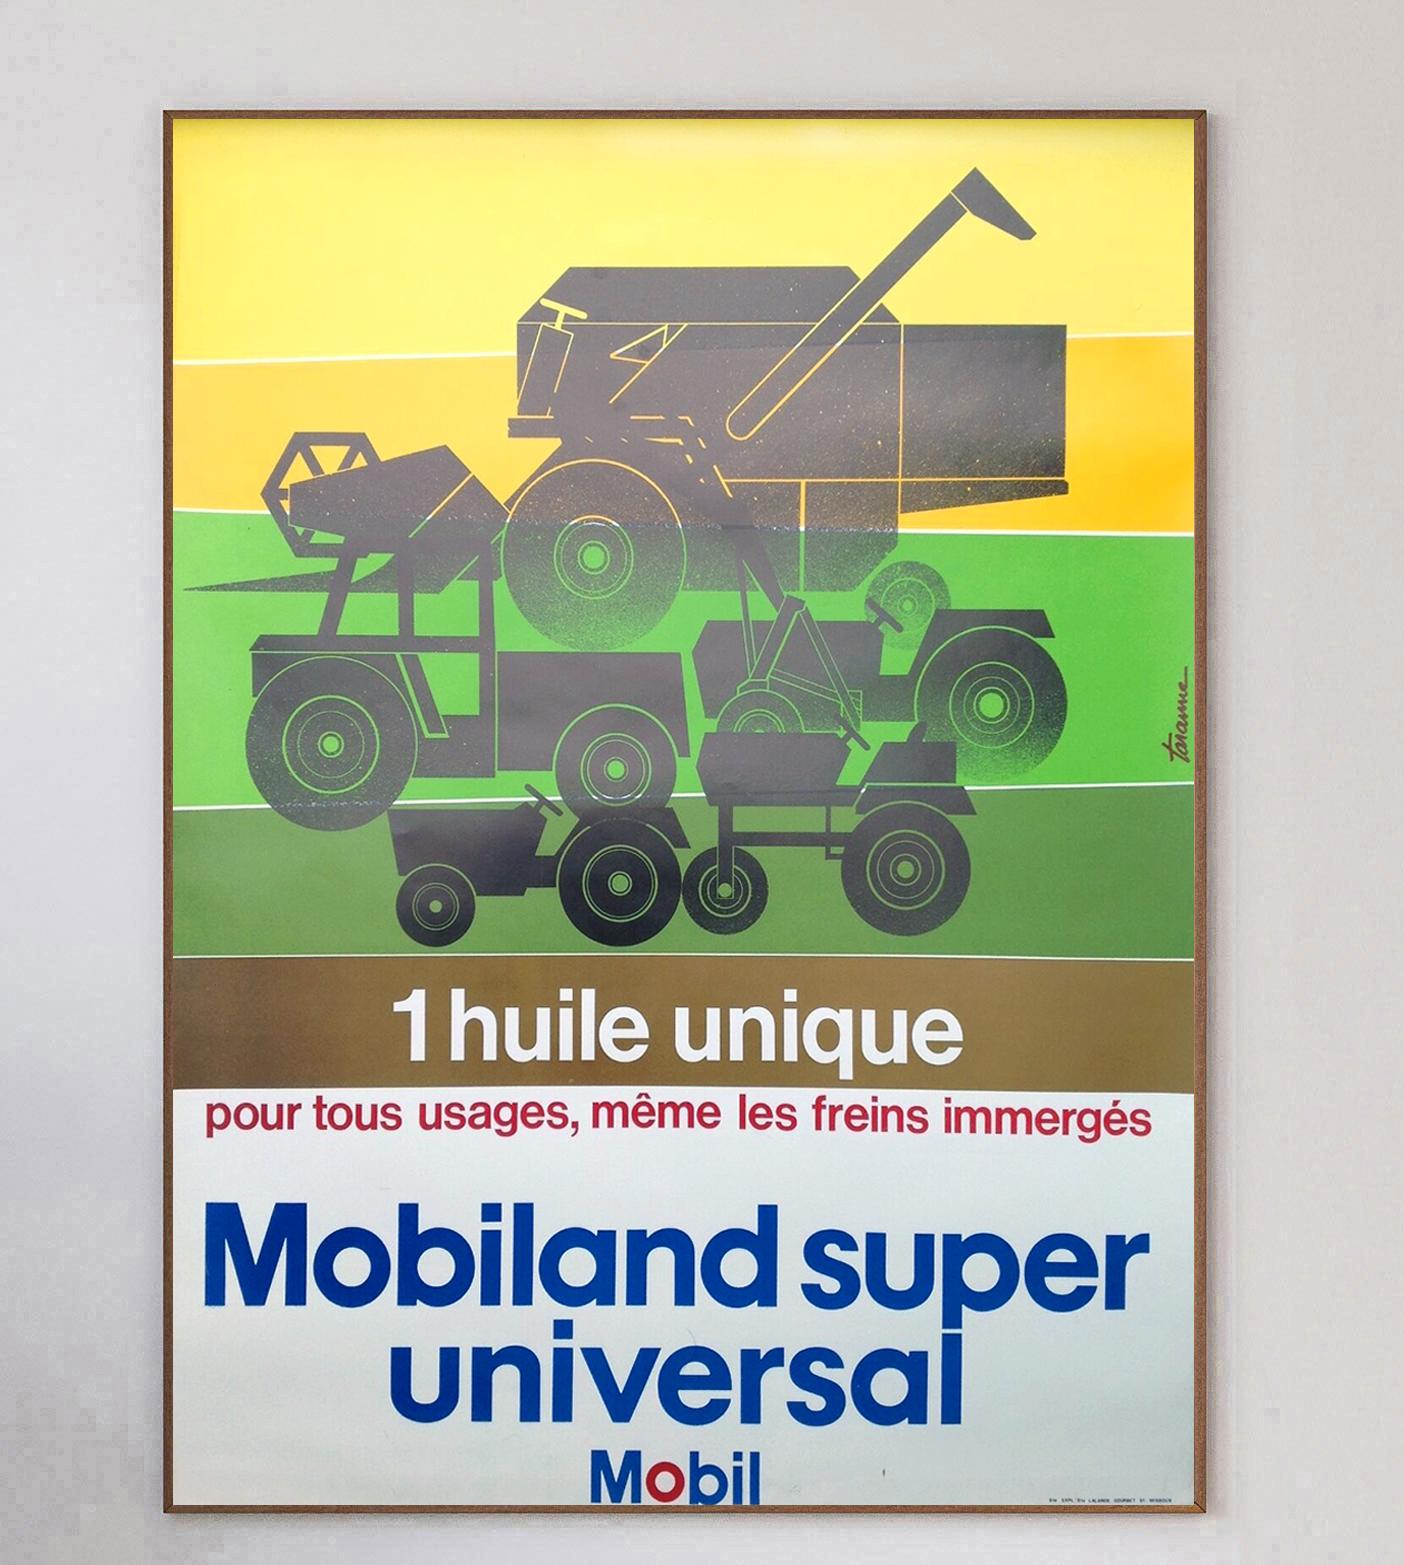 Beautiful mid century design by Taranne for Mobil depicting a selection of agricultural vehicles across colourful farmland. Mobil was founded in 1911 following the ruling to split John D. Rockerfeller's Standard Oil up in to separate entities and is